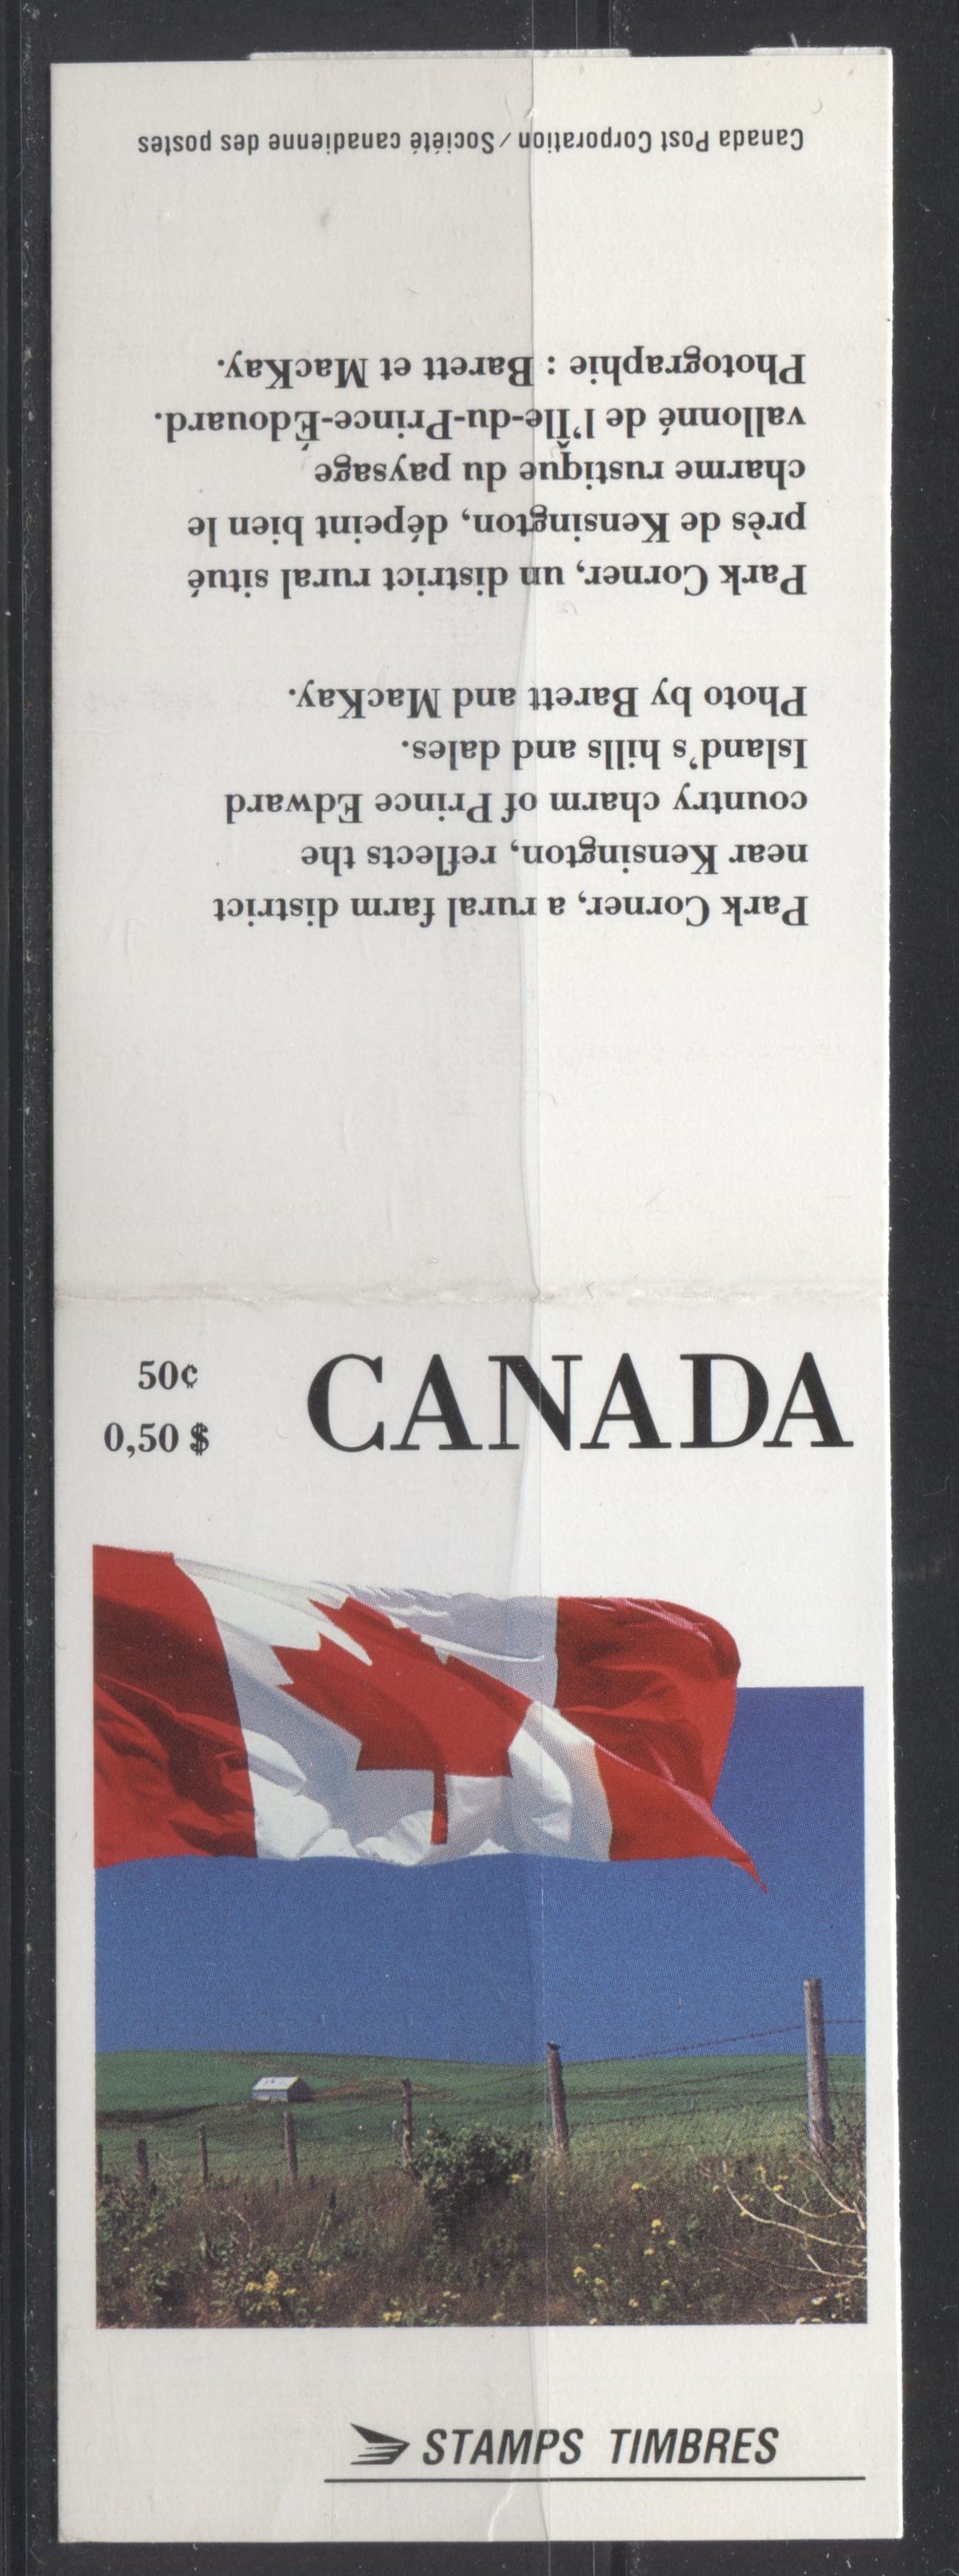 Canada #BK111A (McCann BK111Aa) 1988-1991 Wildlife and Architecture Issue, a VFNH 50c Vending Machine Booklet, DF/MF-fl Cover, Perf. 12.5 x 13 NF/NF Slater Pane